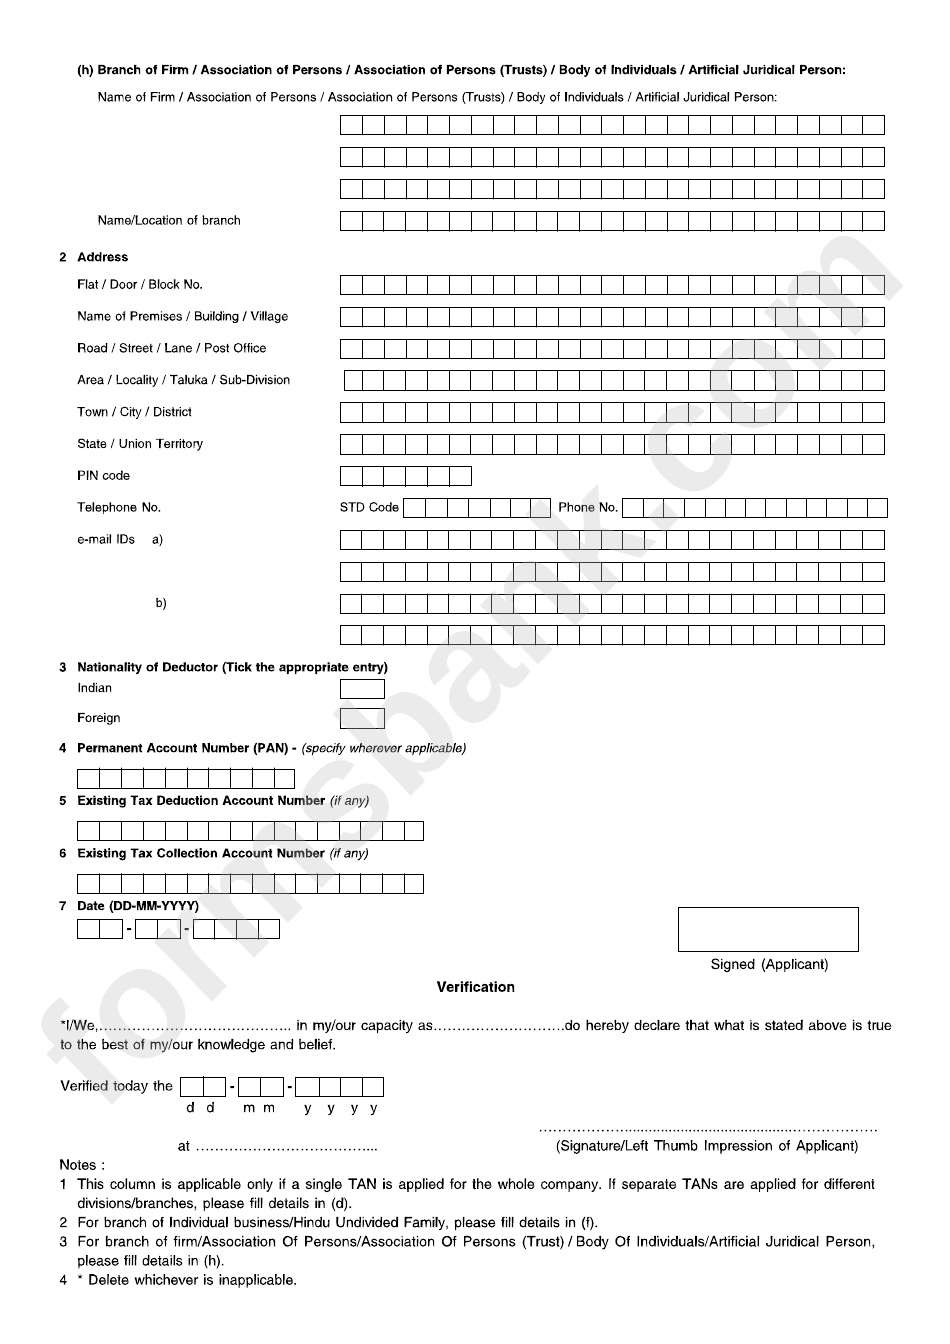 Form 49b - Form Of Application For Allotment Of Tax Deduction And Collection Account Number